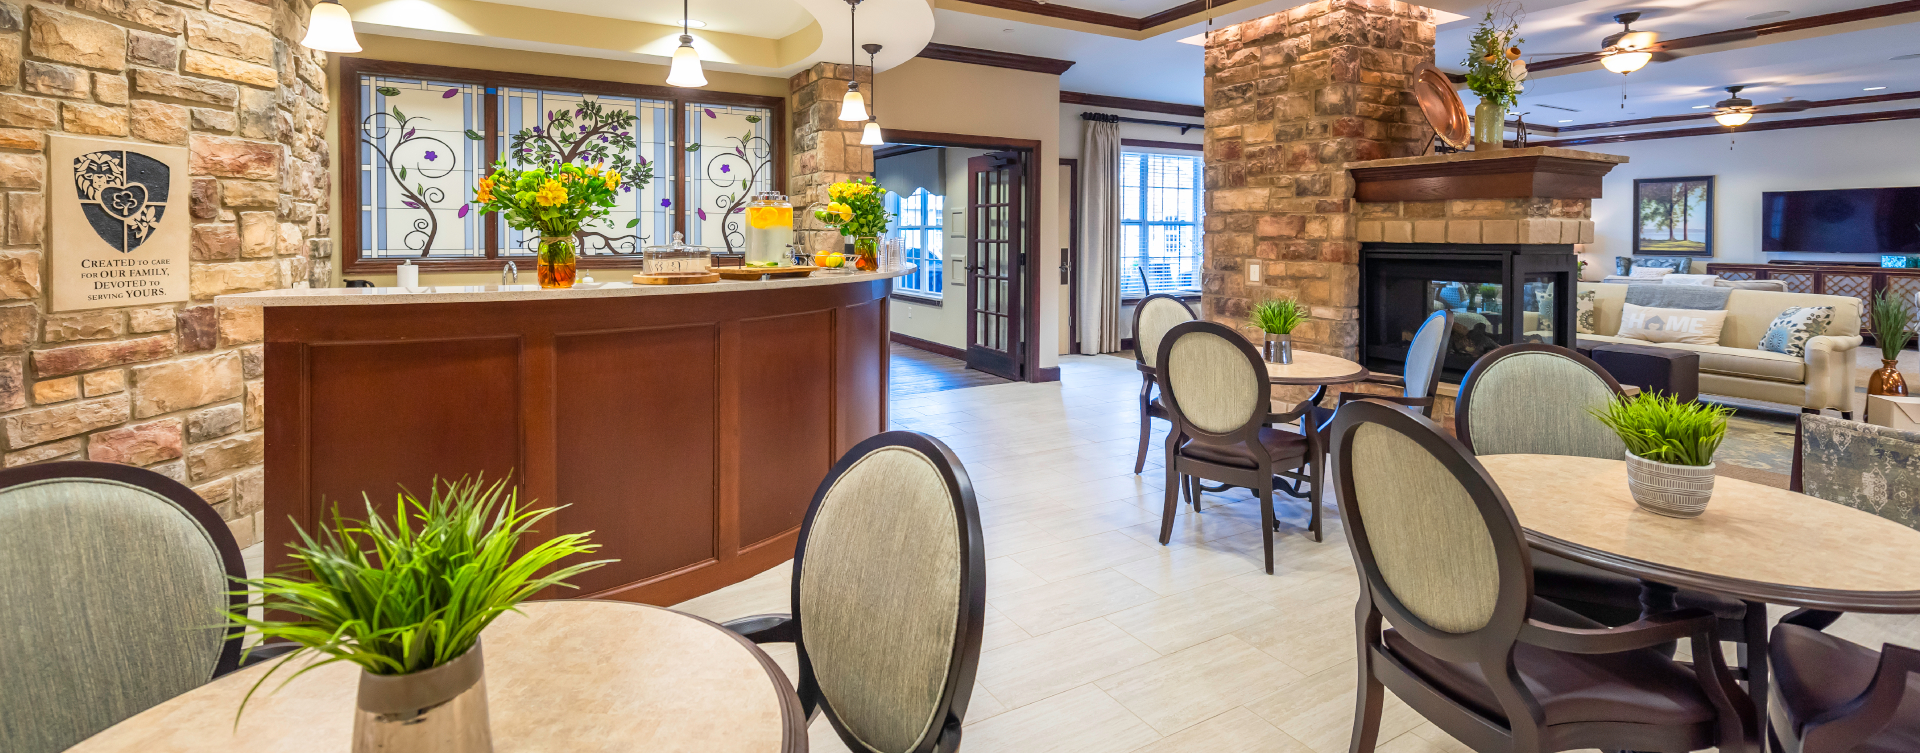 Mingle and converse with old and new friends alike in the bistro at Bickford of Shelby Township